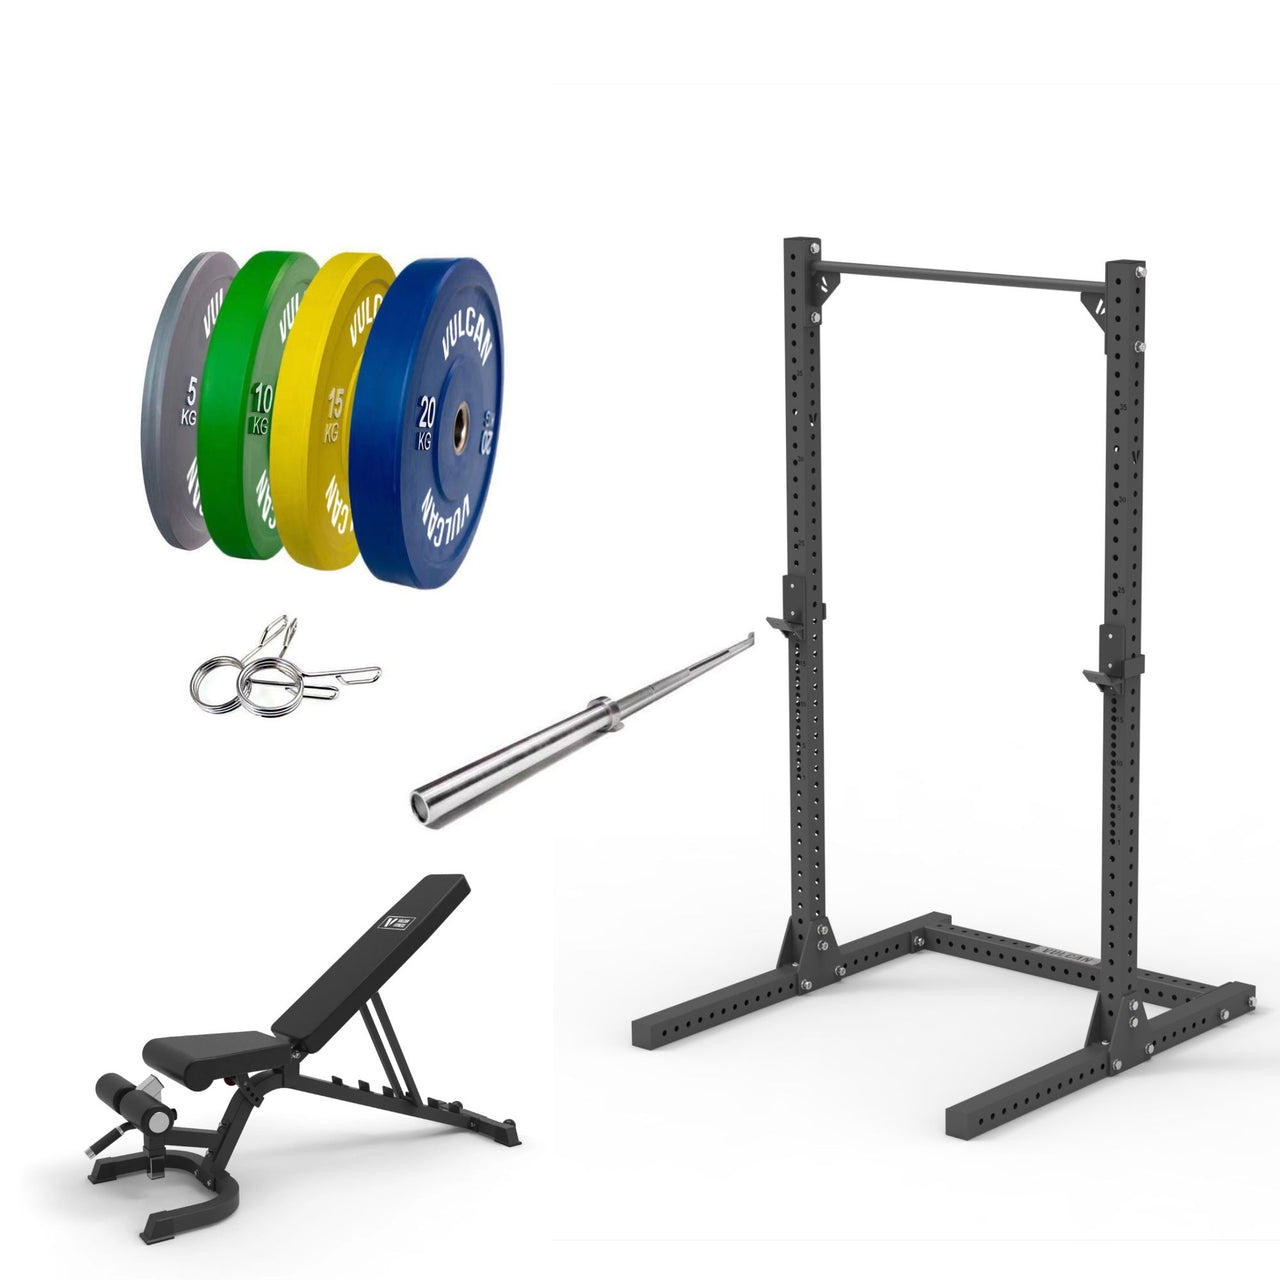 VULCAN Elite Squat Rack, Olympic Barbell, 100kg Colour Bumper Weight Plates & Adjustable Bench | PRE-ORDER MID-LATE FEBRUARY